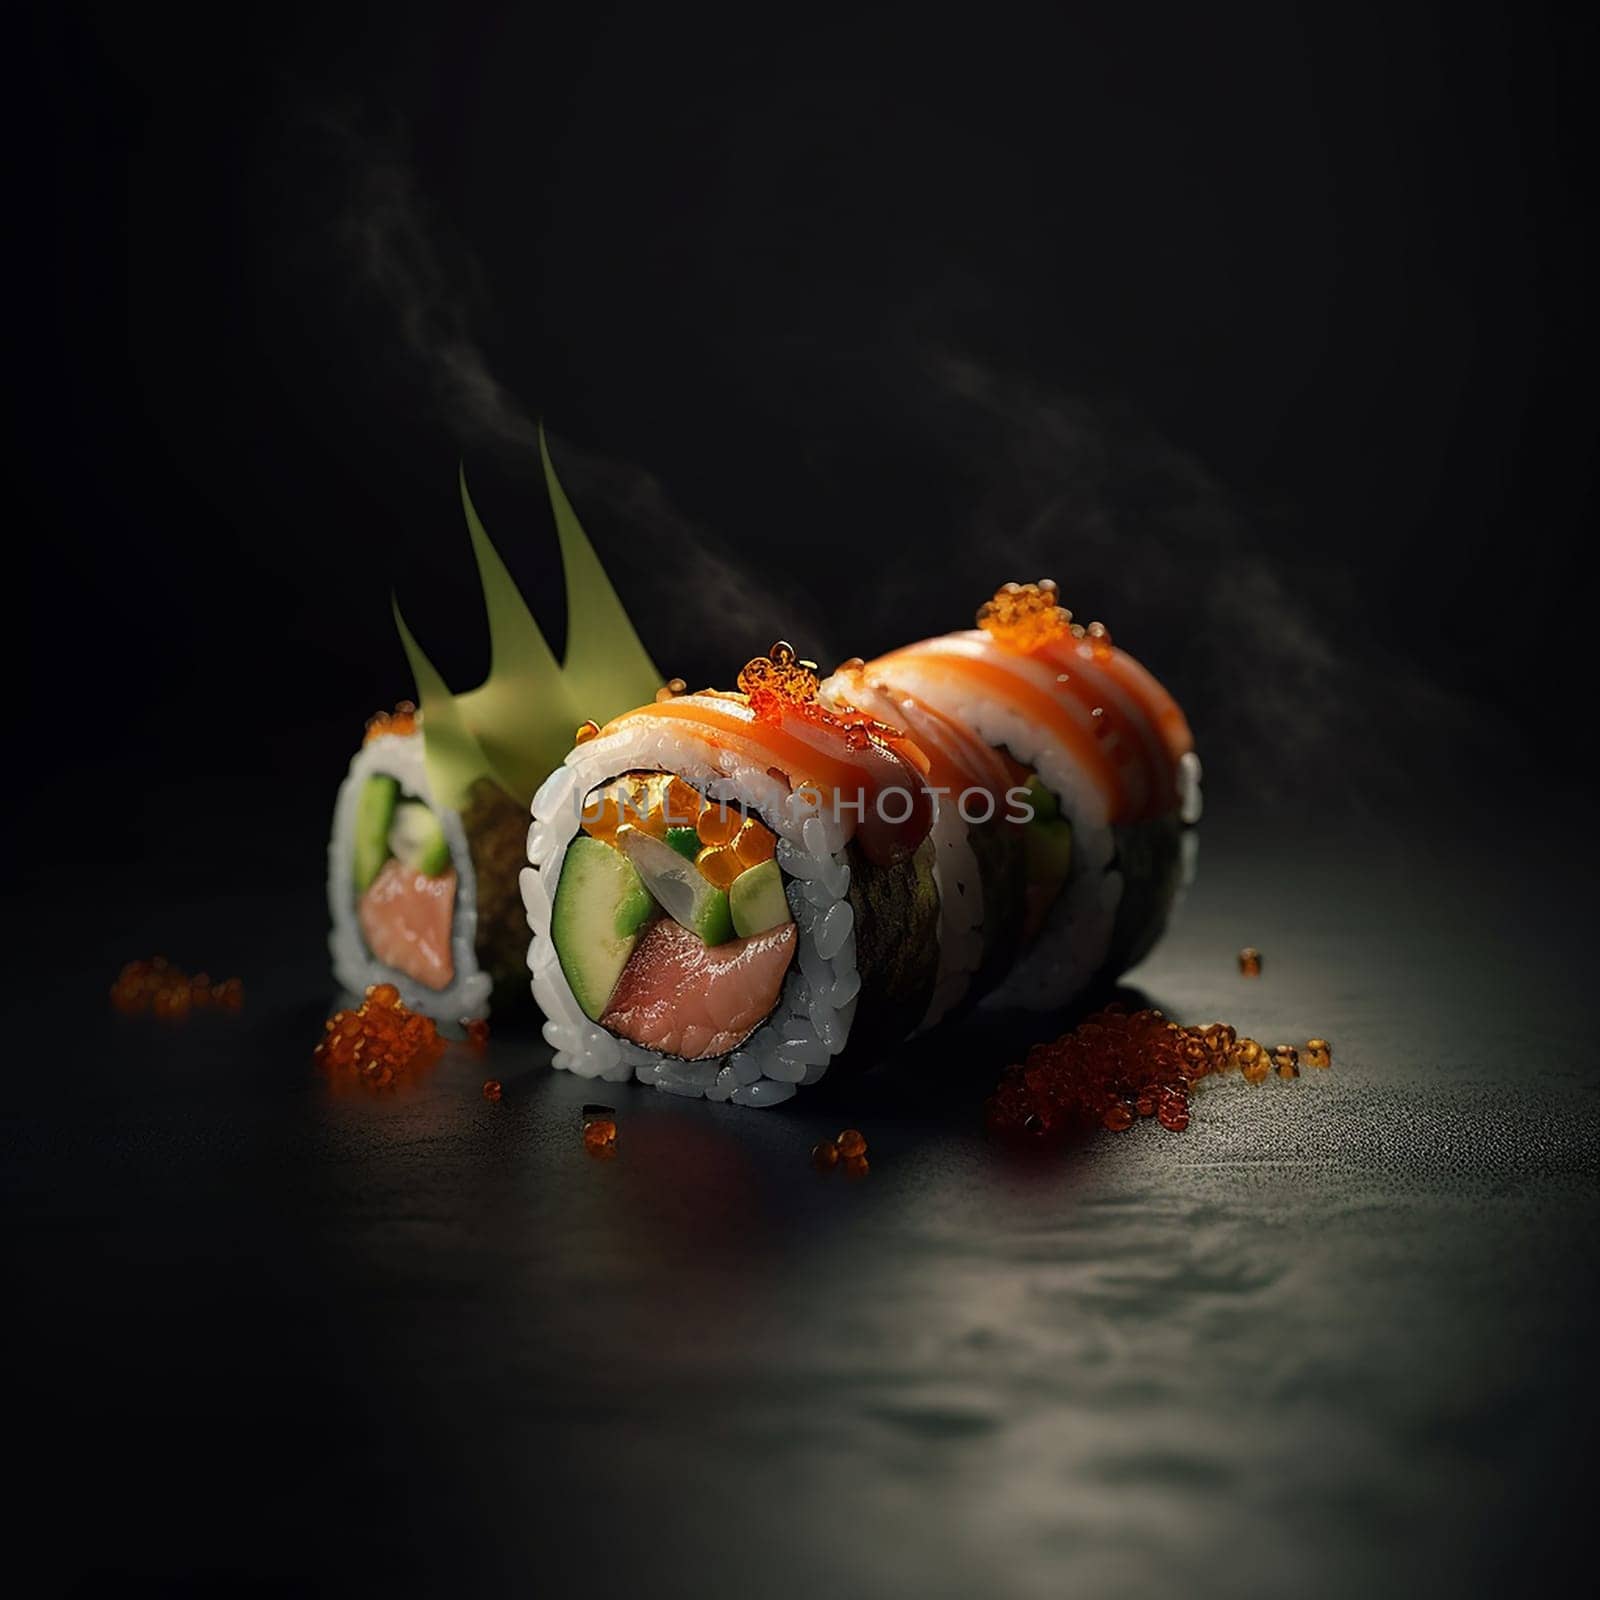 Sushi roll with fresh ingredients, artistic presentation on a dark surface with smoke effect.